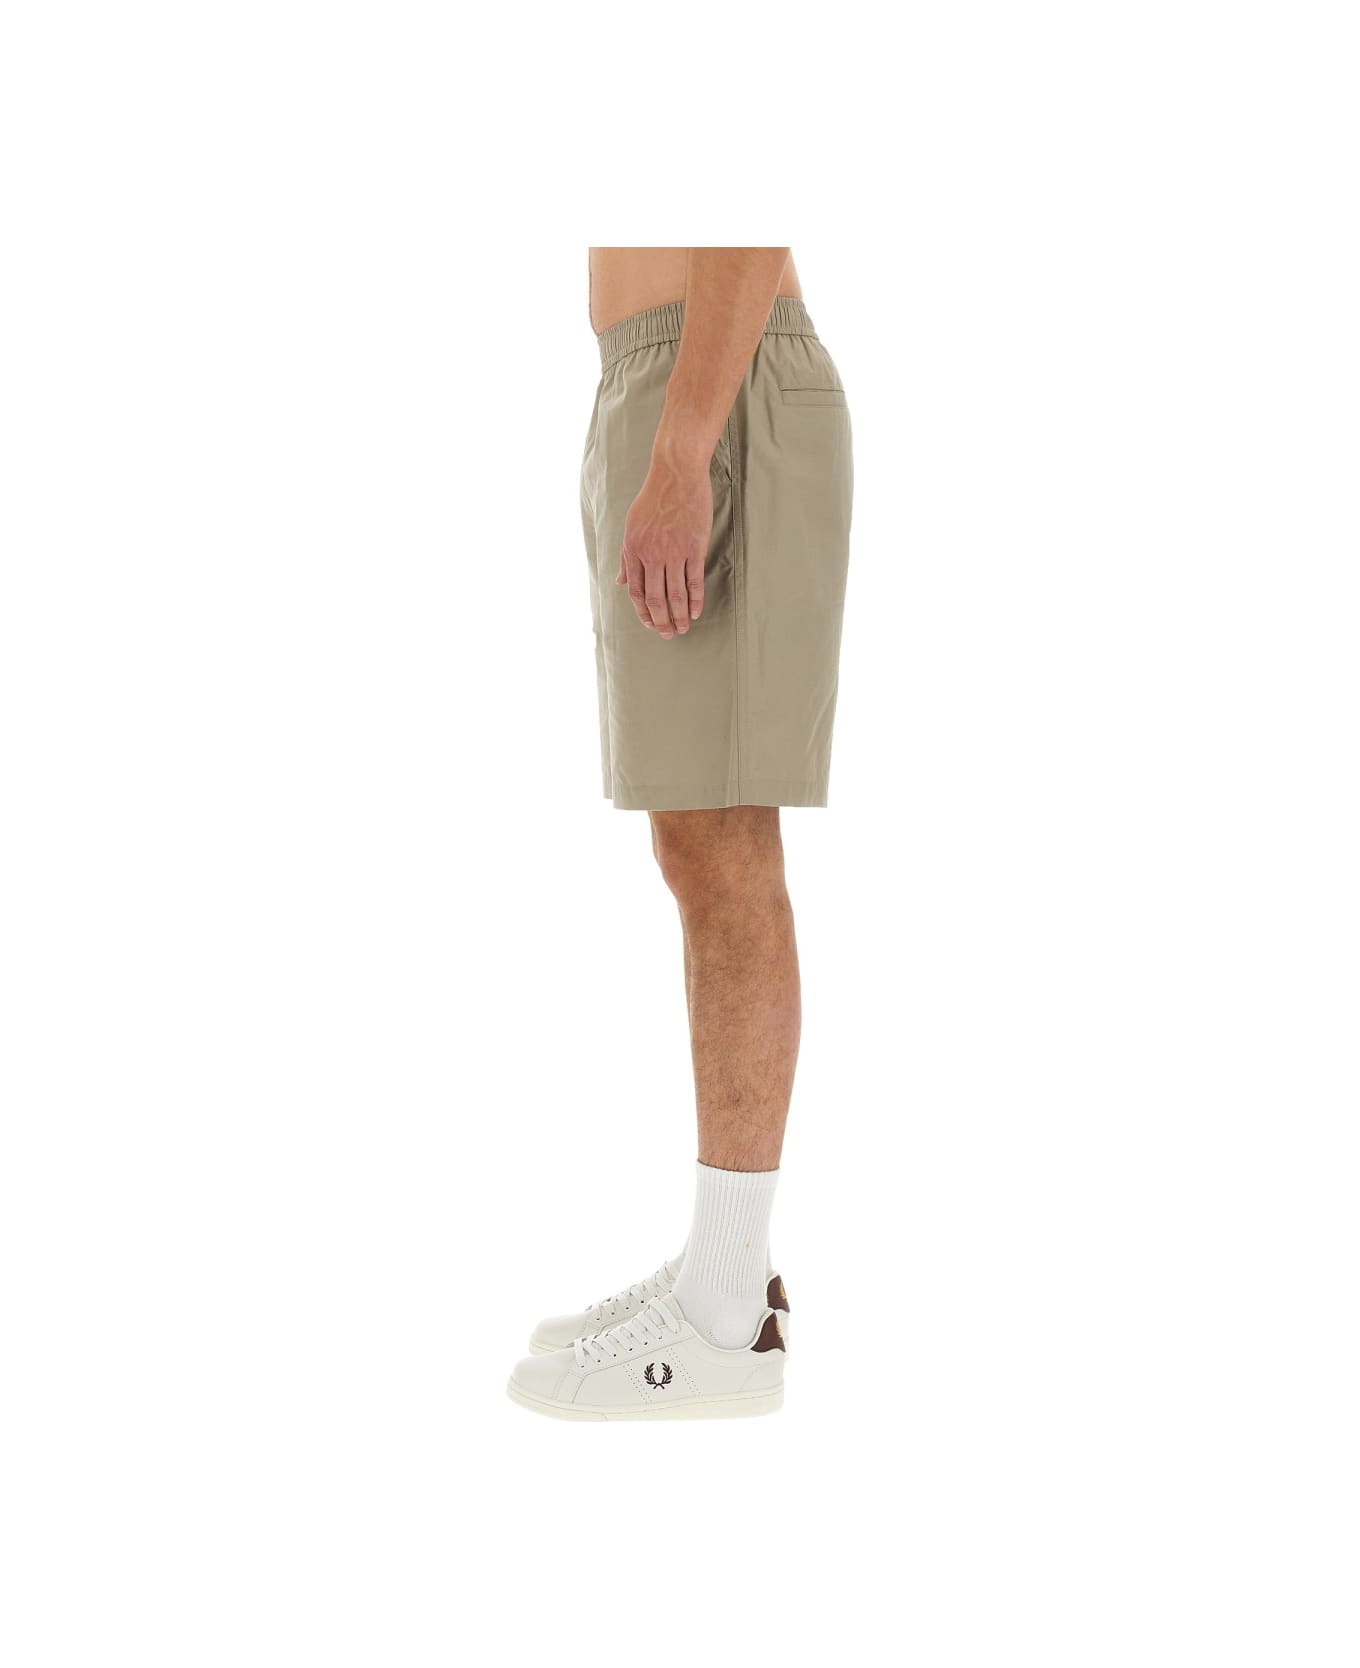 Fred Perry Cotton Bermuda Shorts - BEIGE ショートパンツ